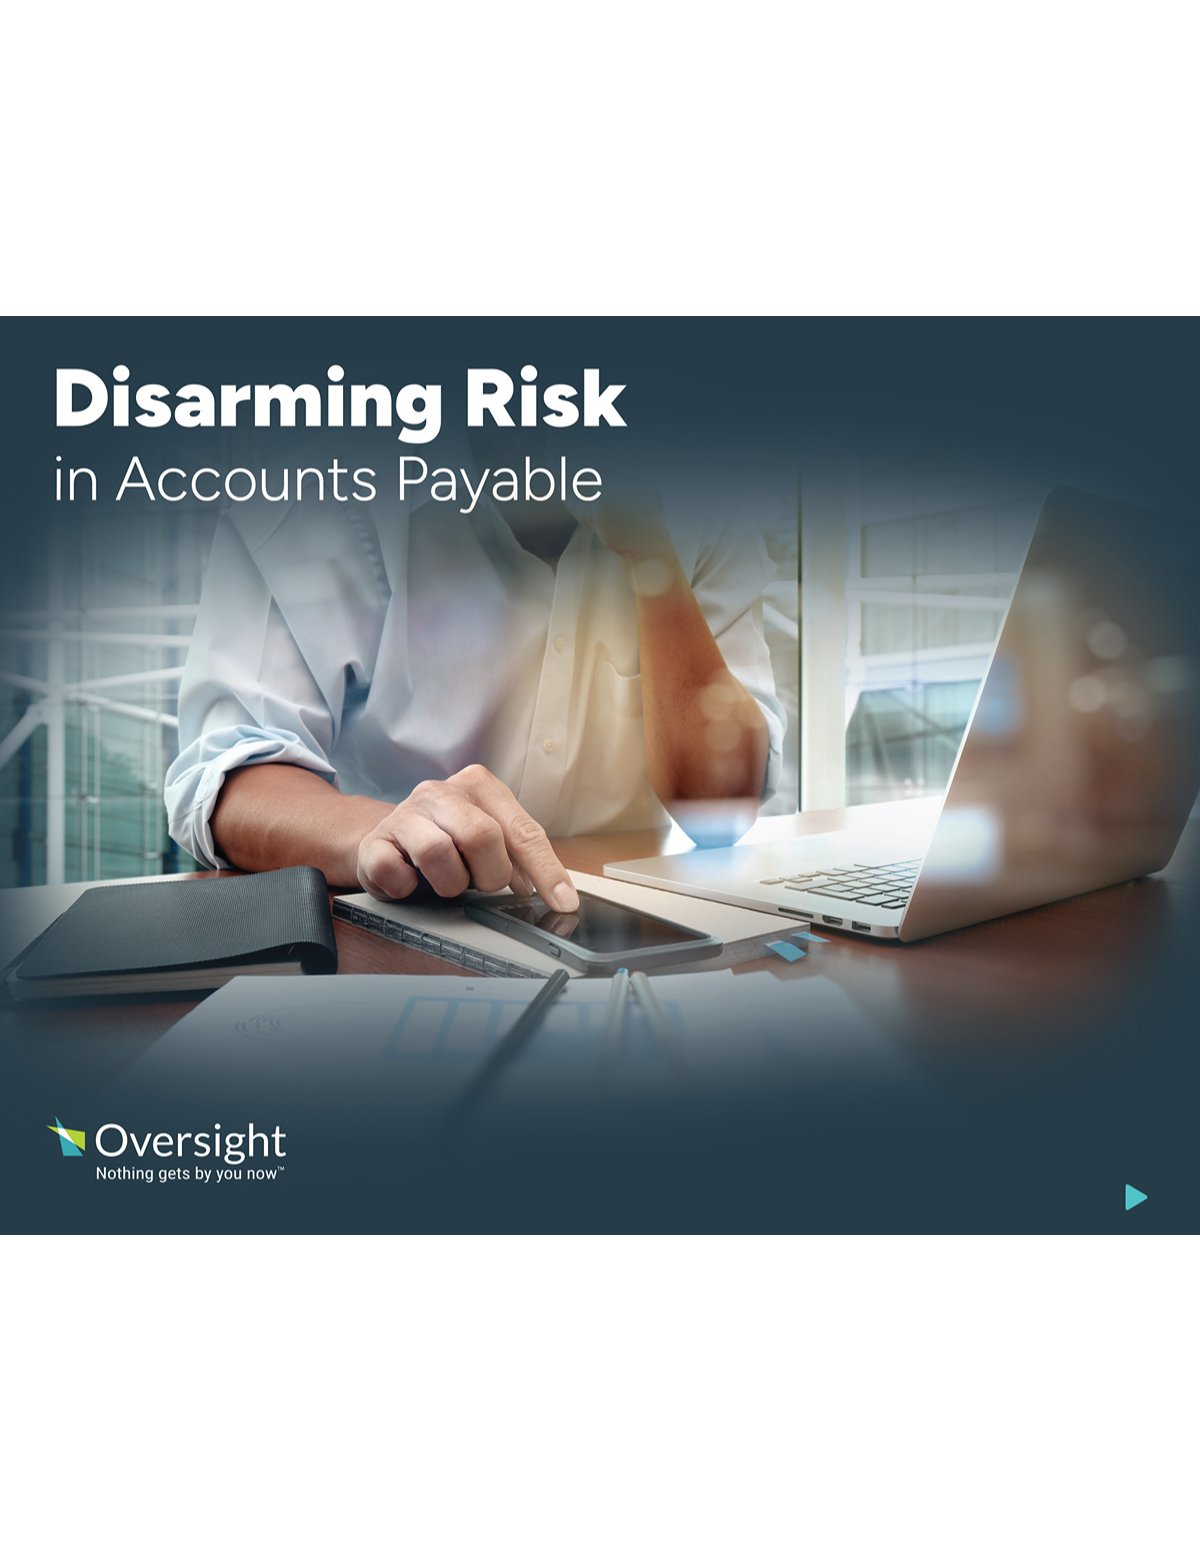 Disarming Risk in Accounts Payable